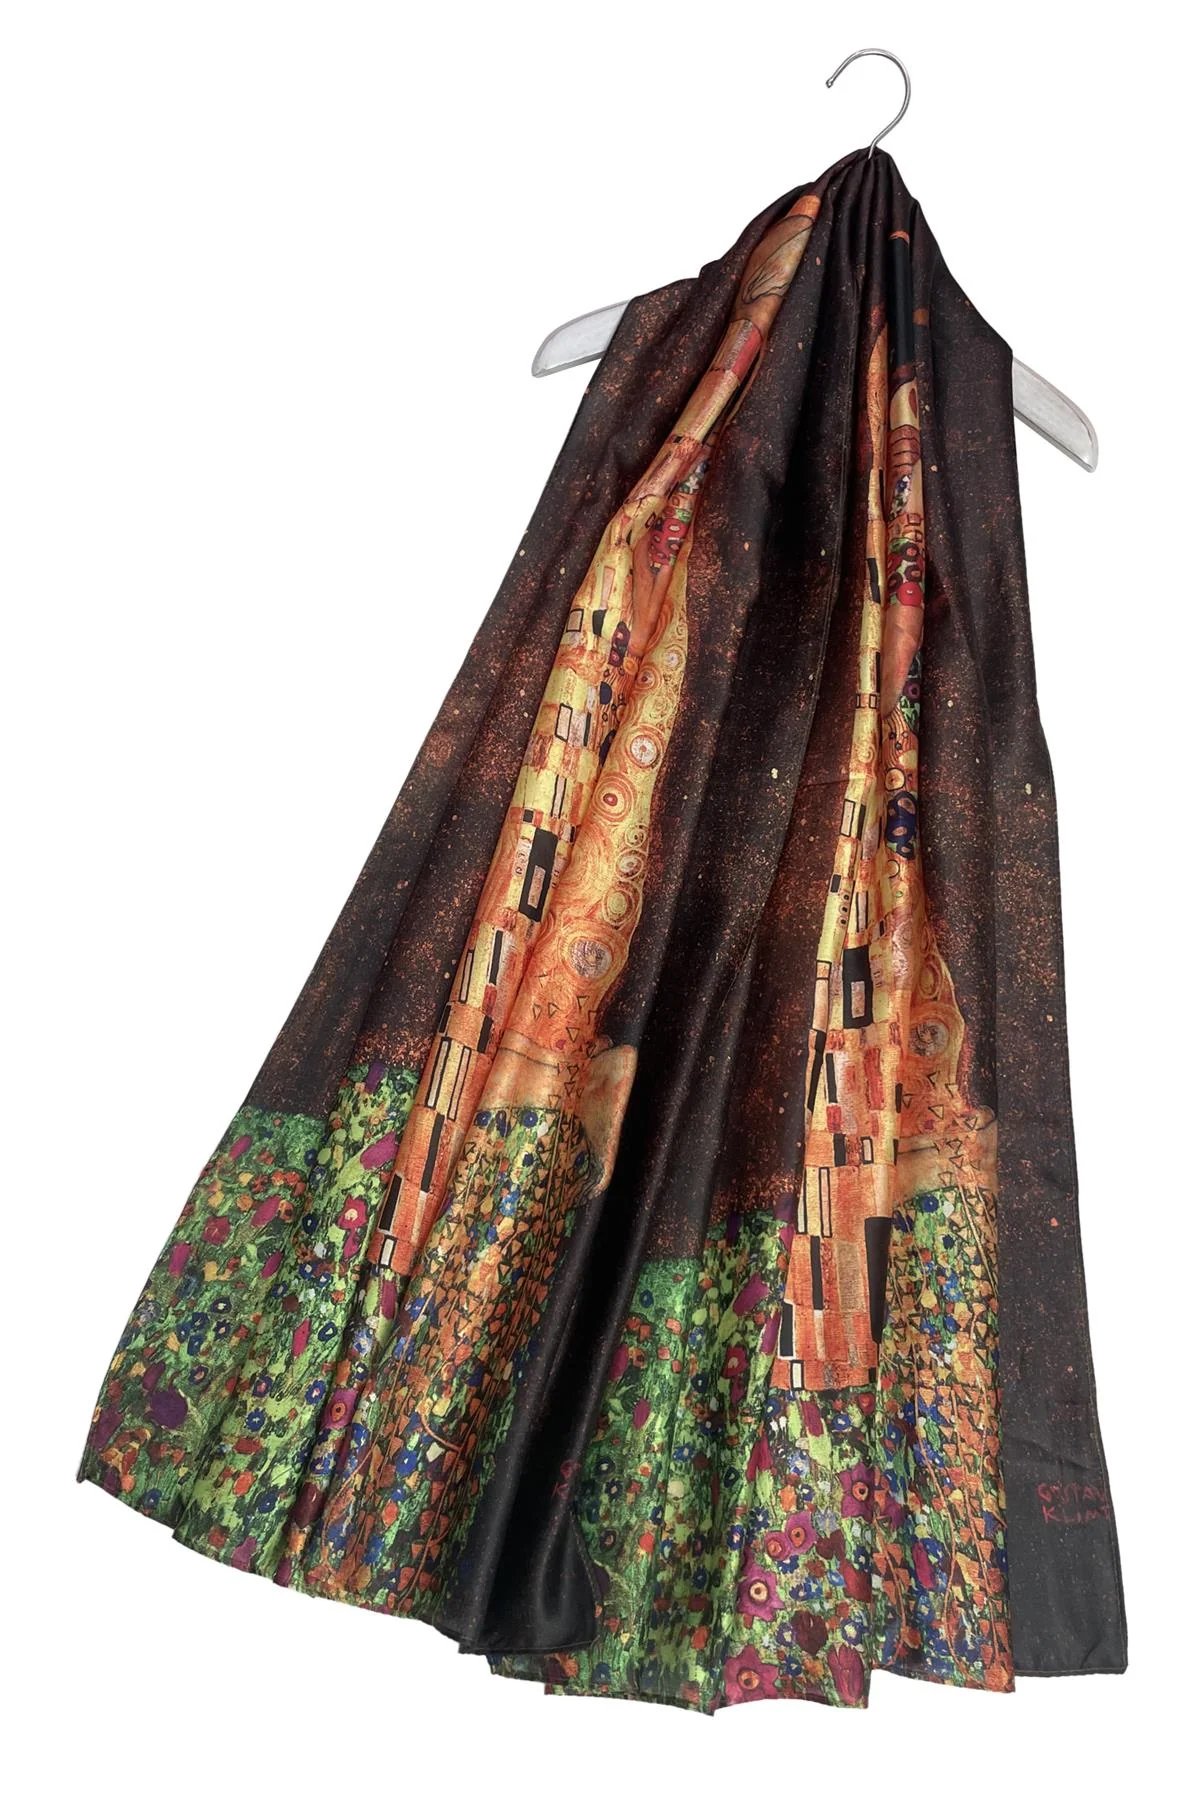 Klimt The Kiss Painting Scarf – Brown : Scarves Direct: Scarf ...